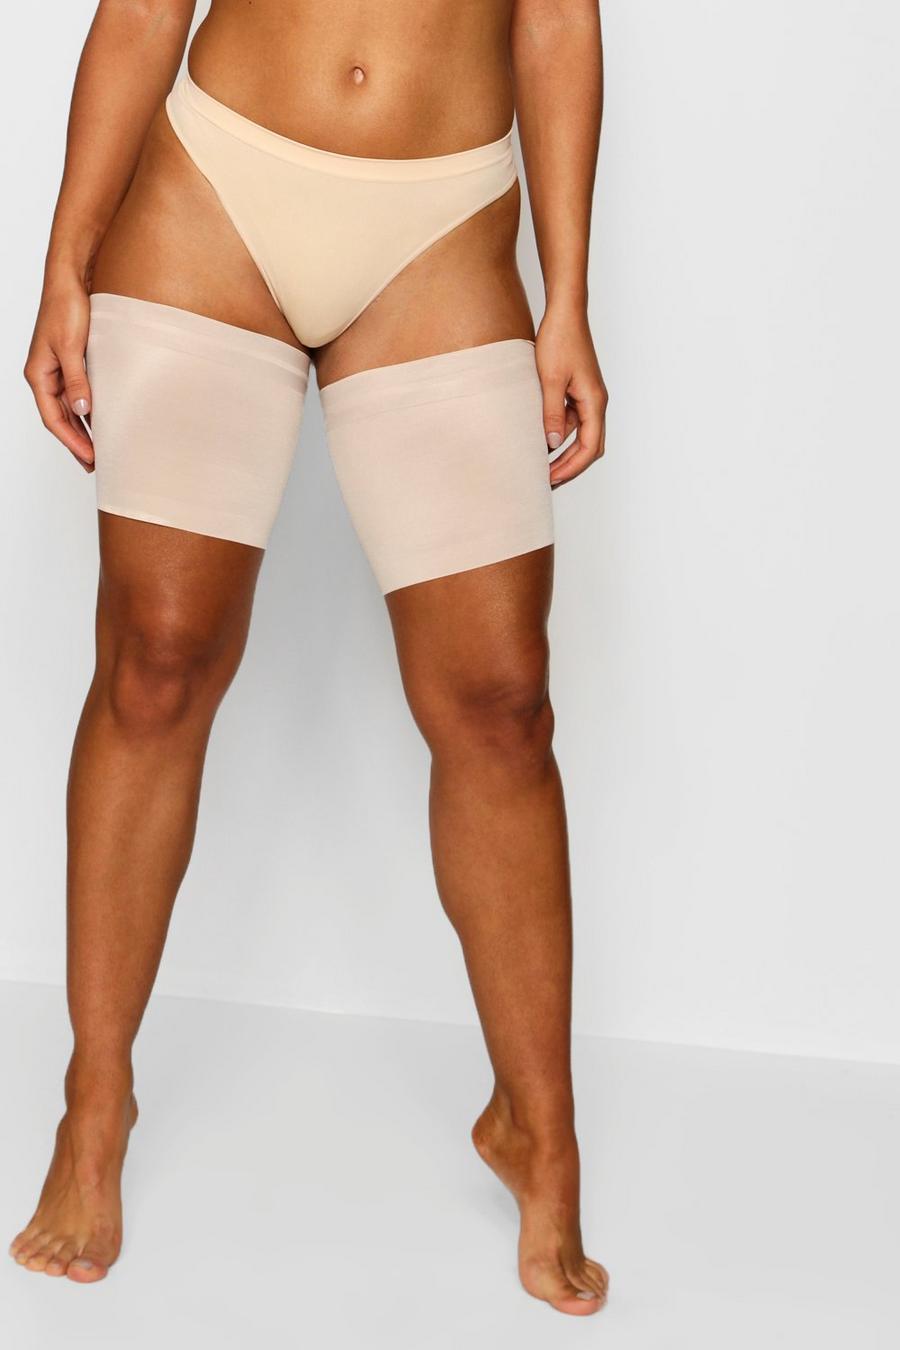 Nude color carne Anti Chafing Thigh Band